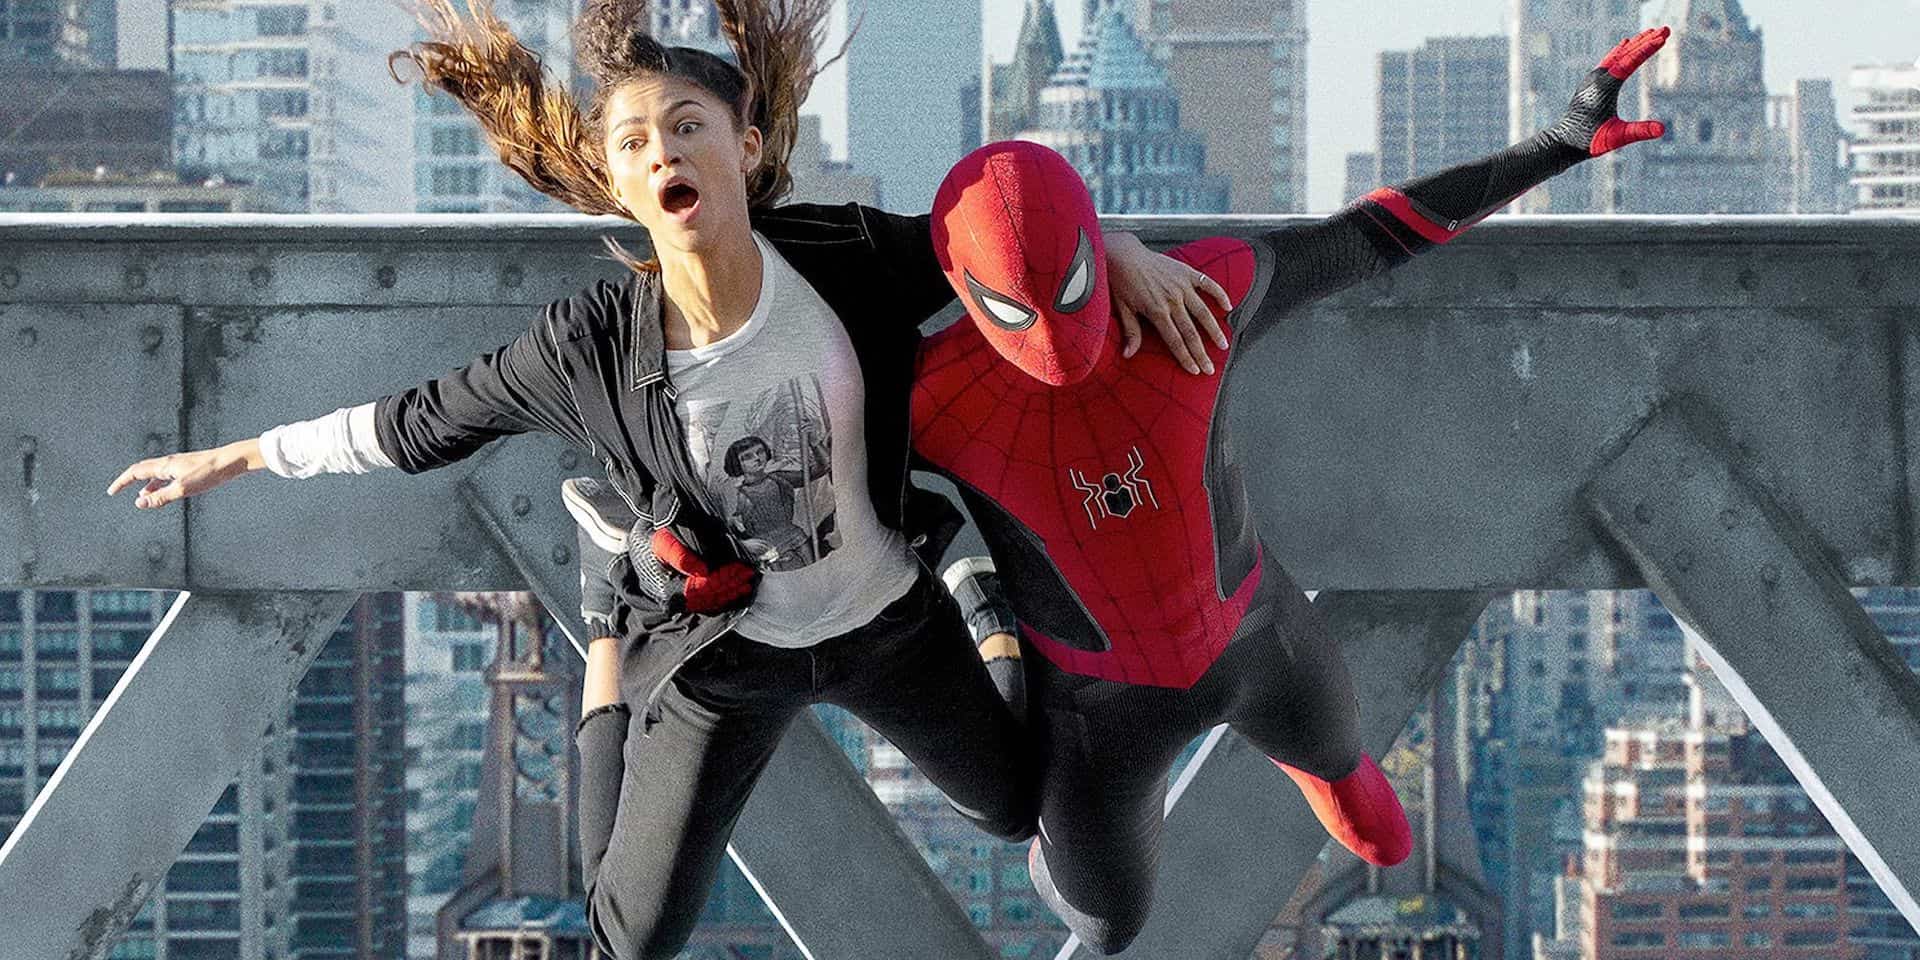 'Spider-Man: No Way Home' starring Tom Holland hit theaters months ago.  But where can you see it online?  Here's everything you need to know.